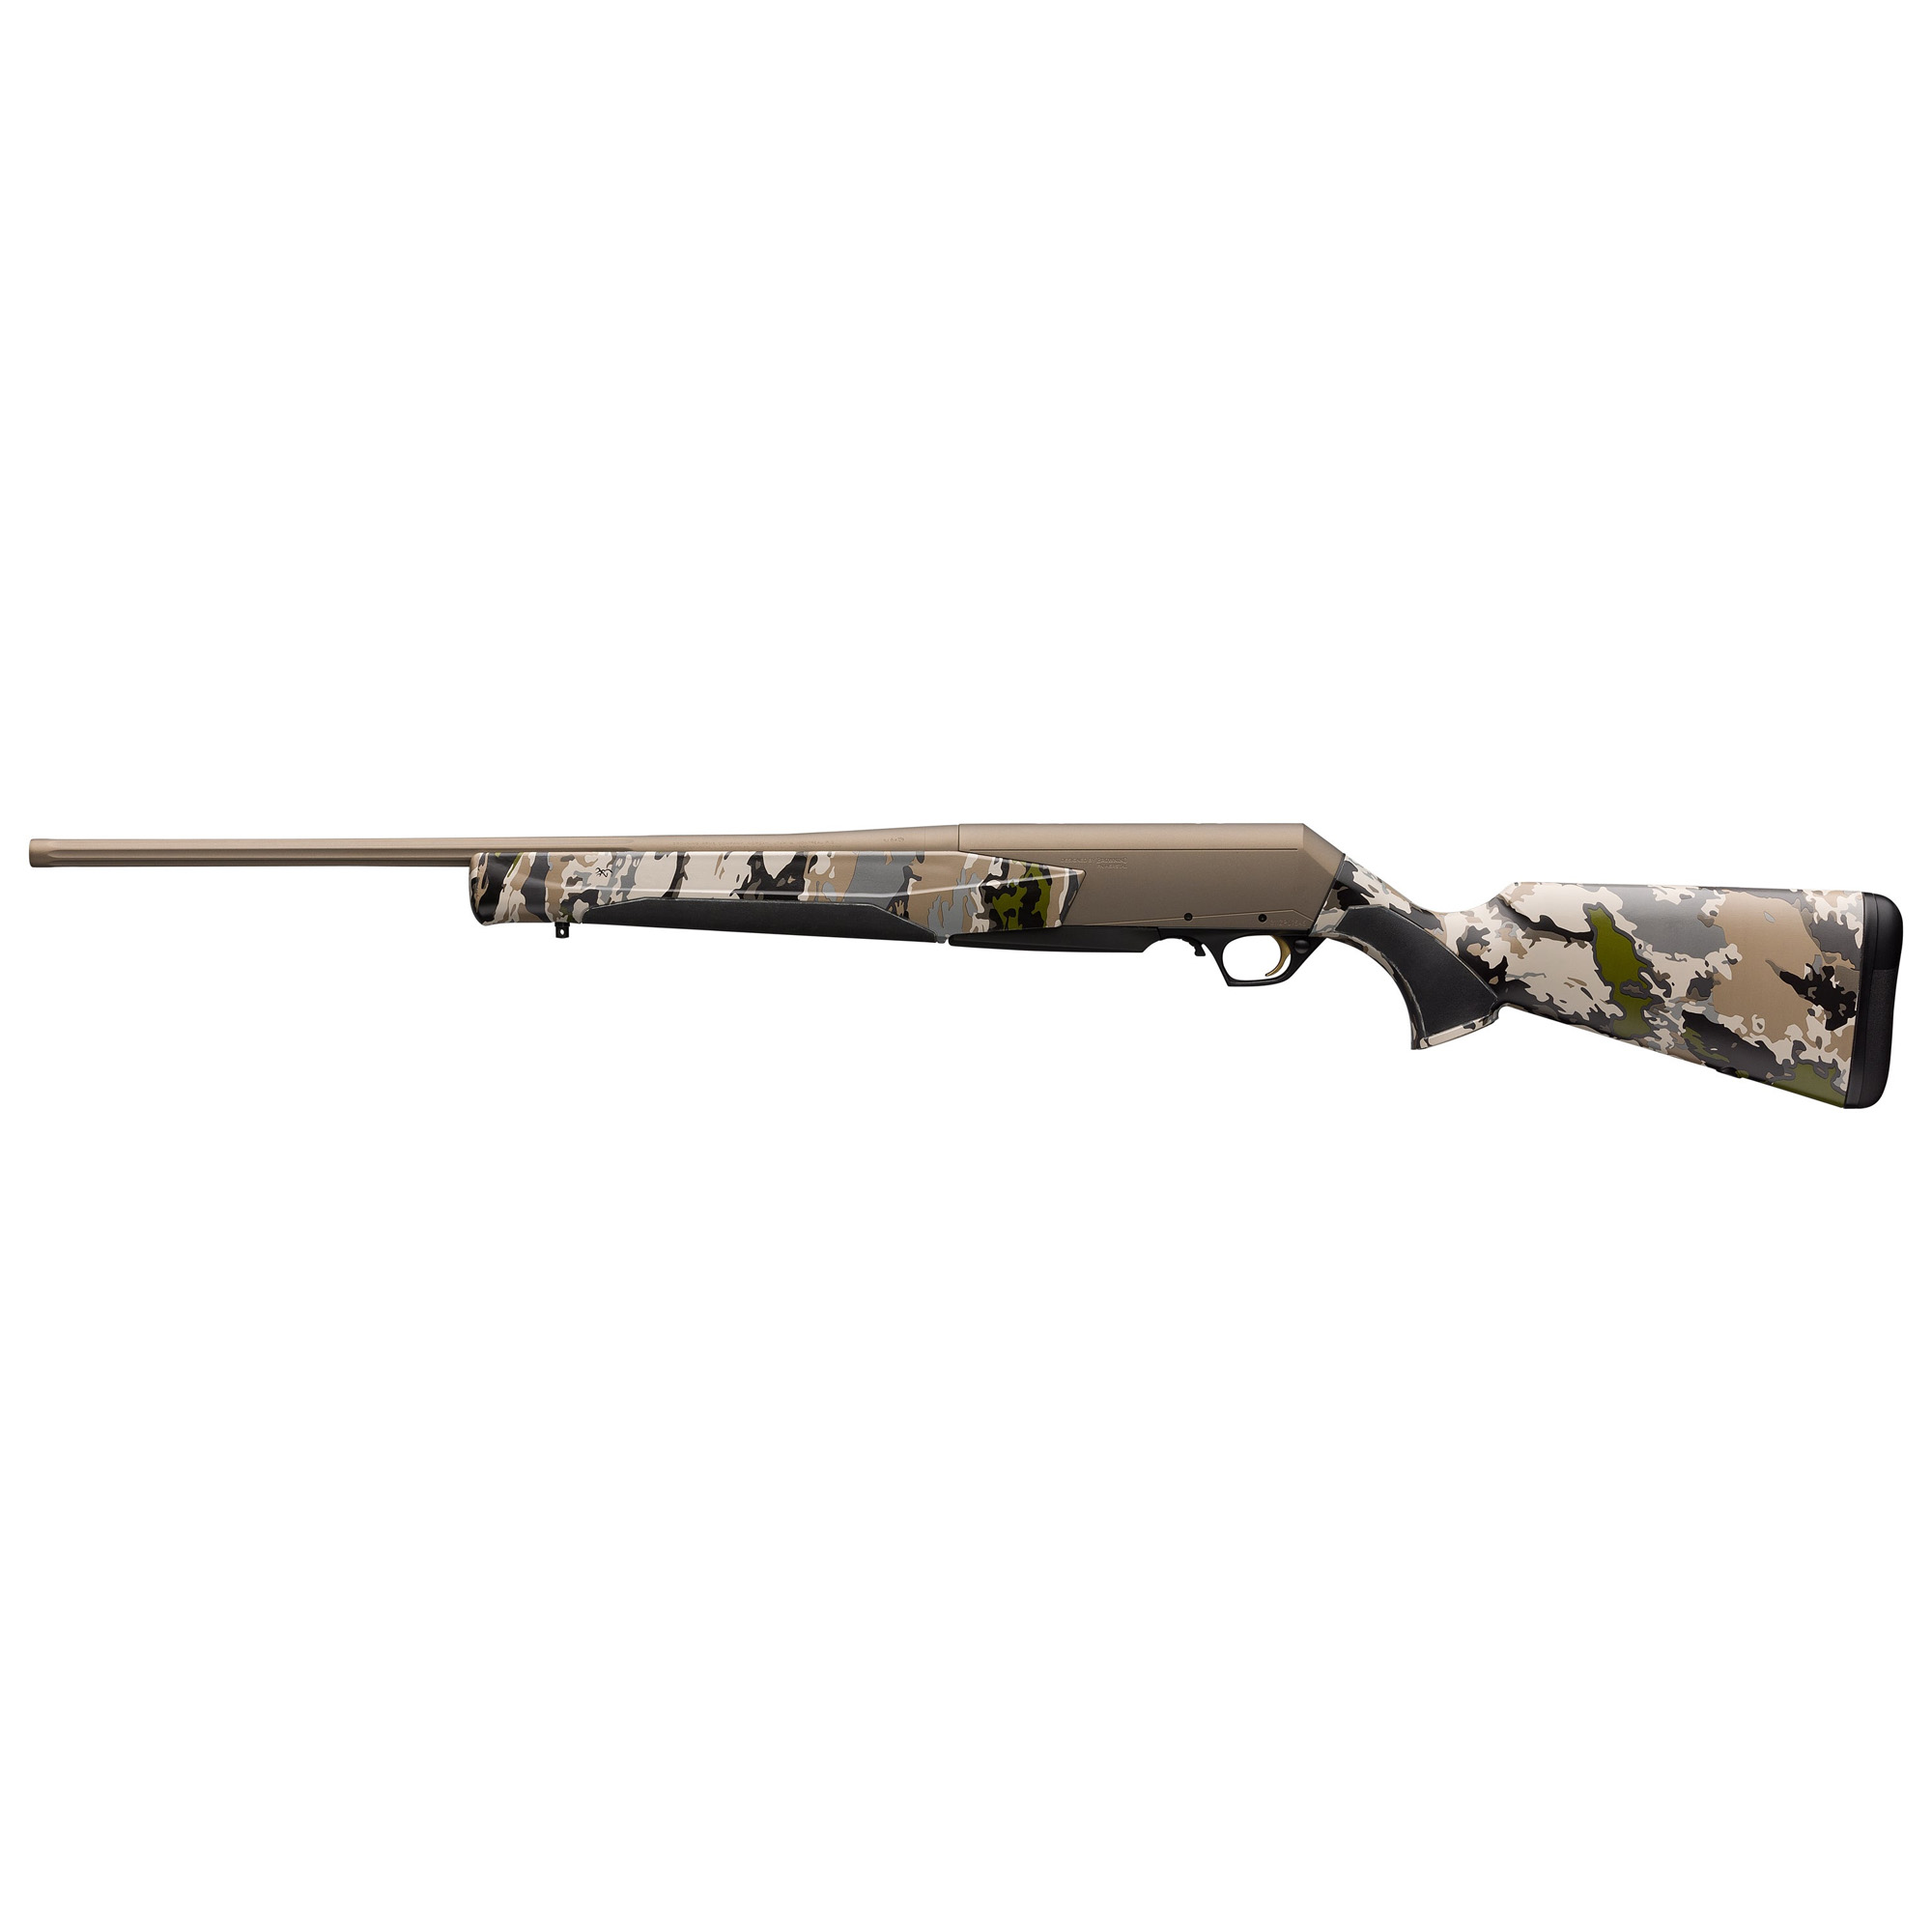 Browning, BAR MK3 Speed, Hunting Rifle, Semi-automatic, 308 Winchester, 22" Barrel, Fluted Barrel, Smoked Bronze, OVIX Camo Stock, 4 Rounds, Right Hand